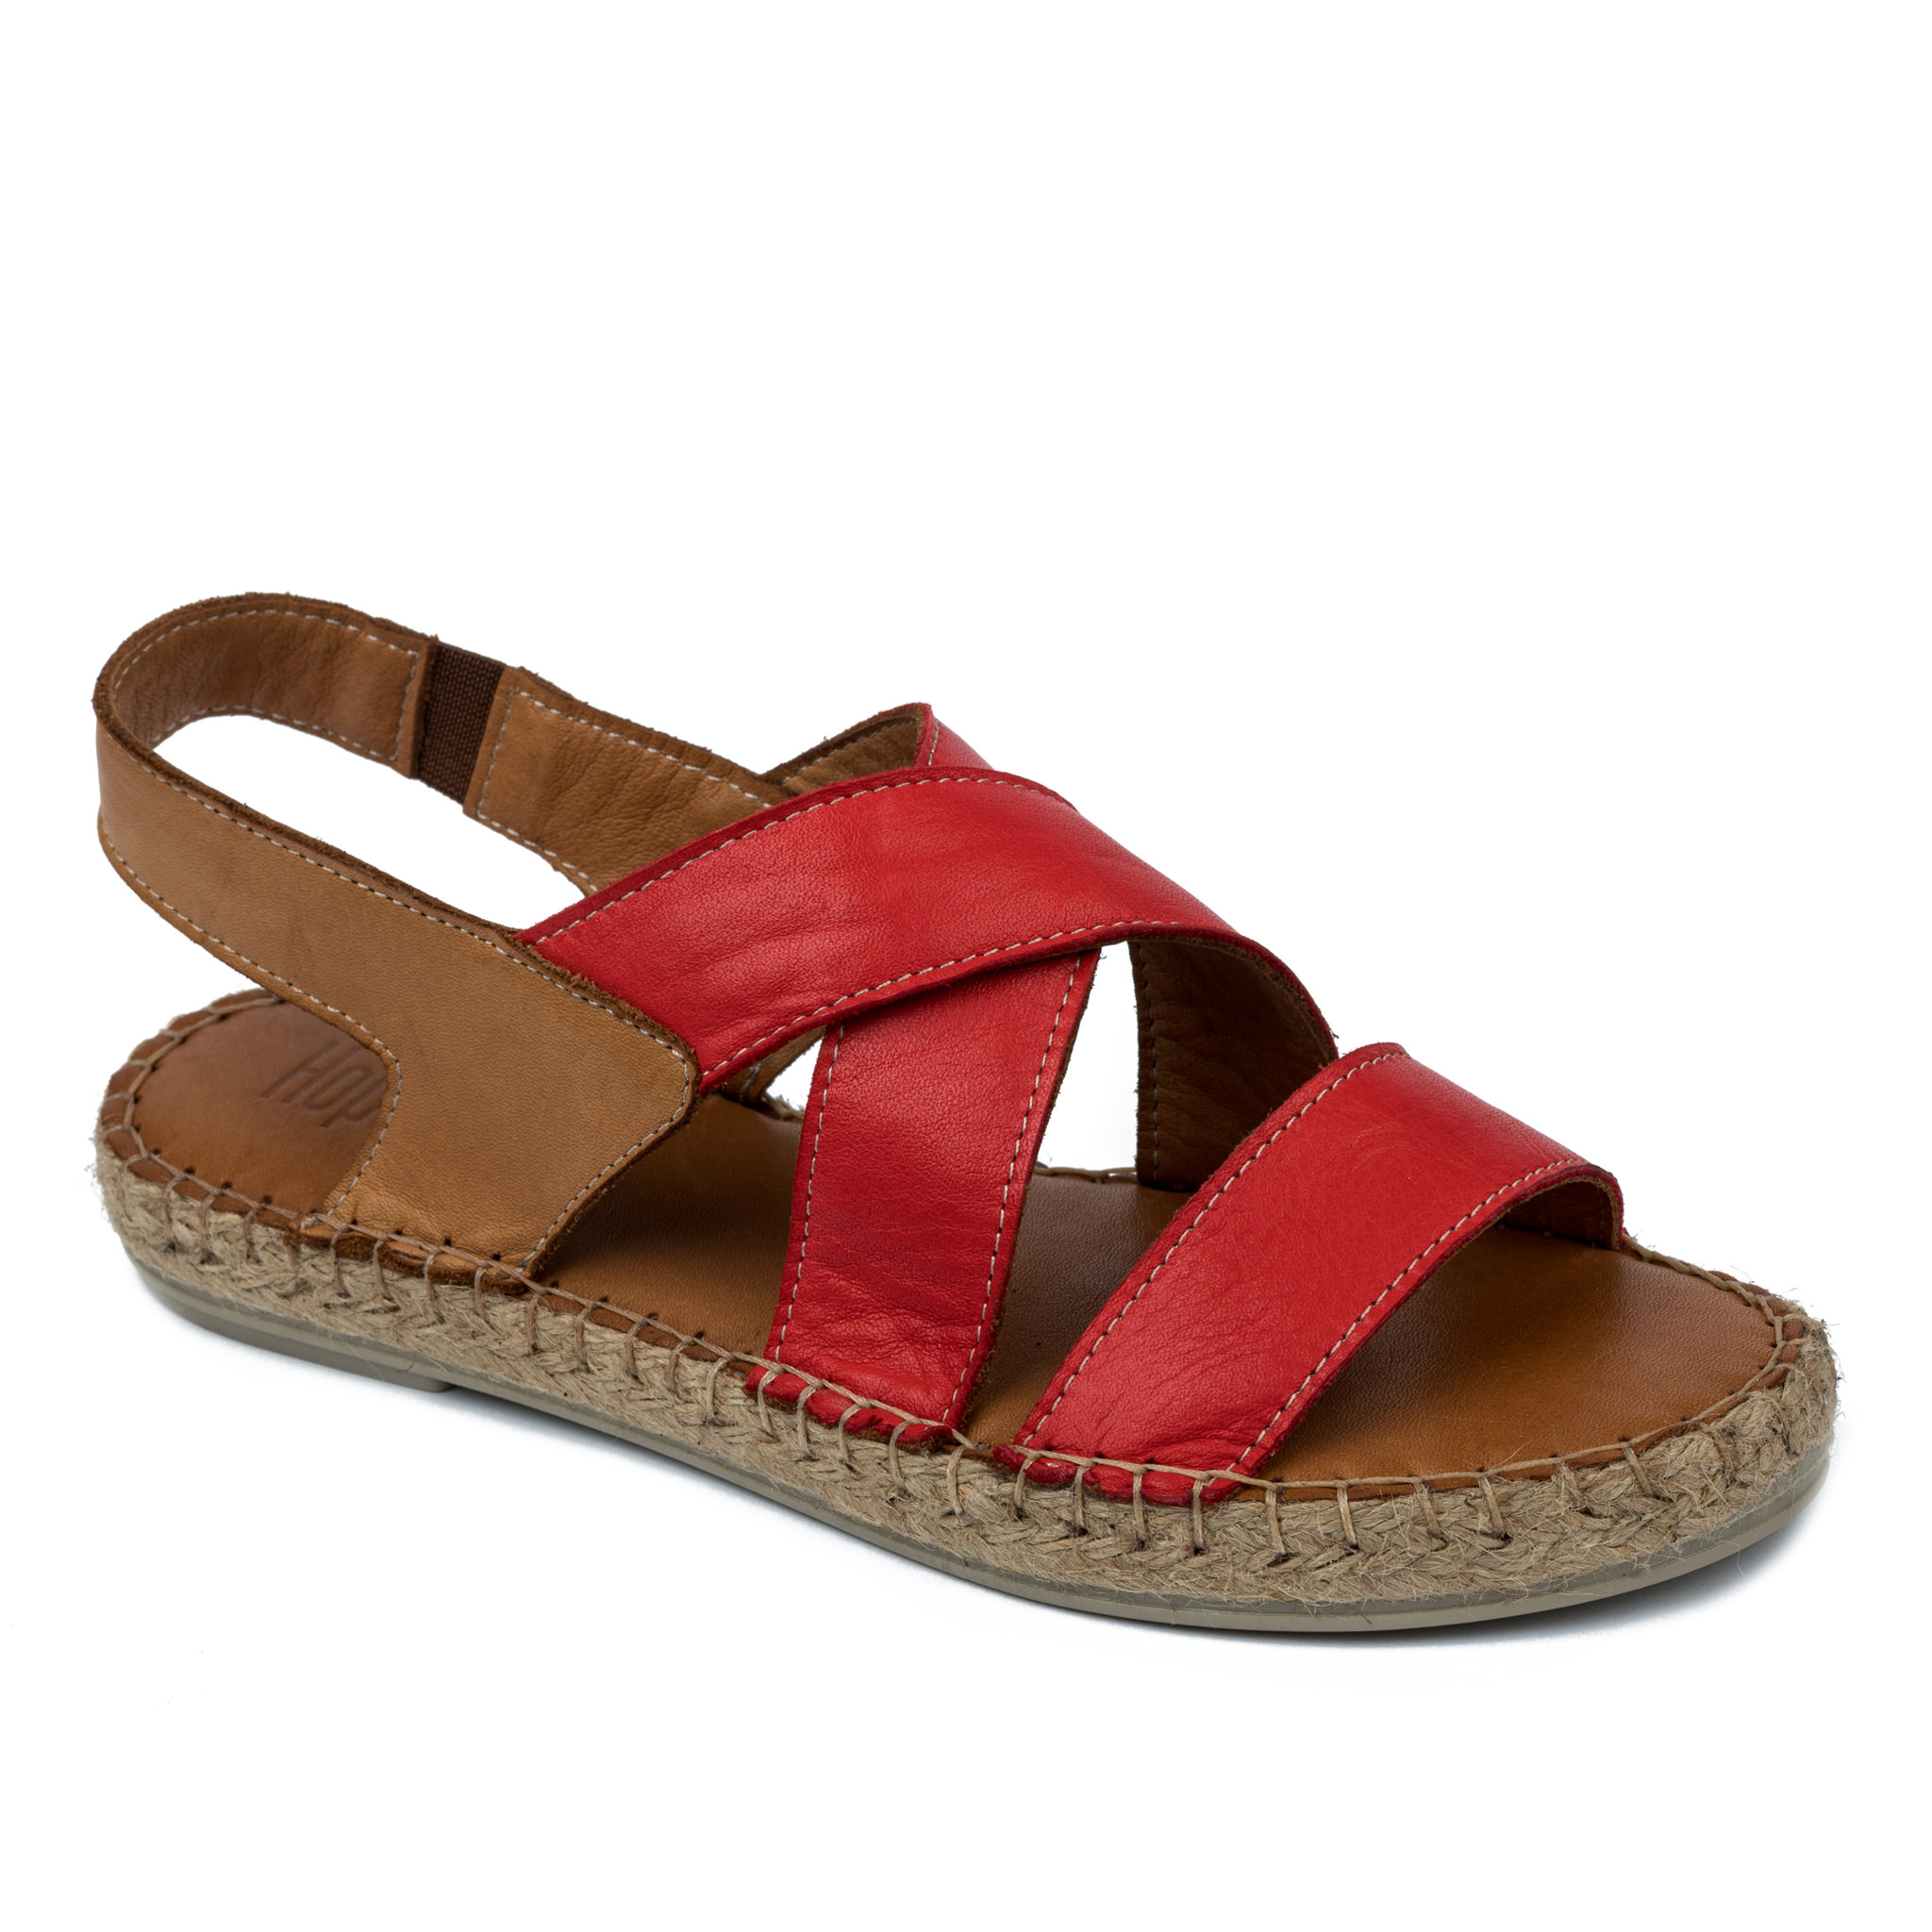 Leather espadrilles A586 - RED